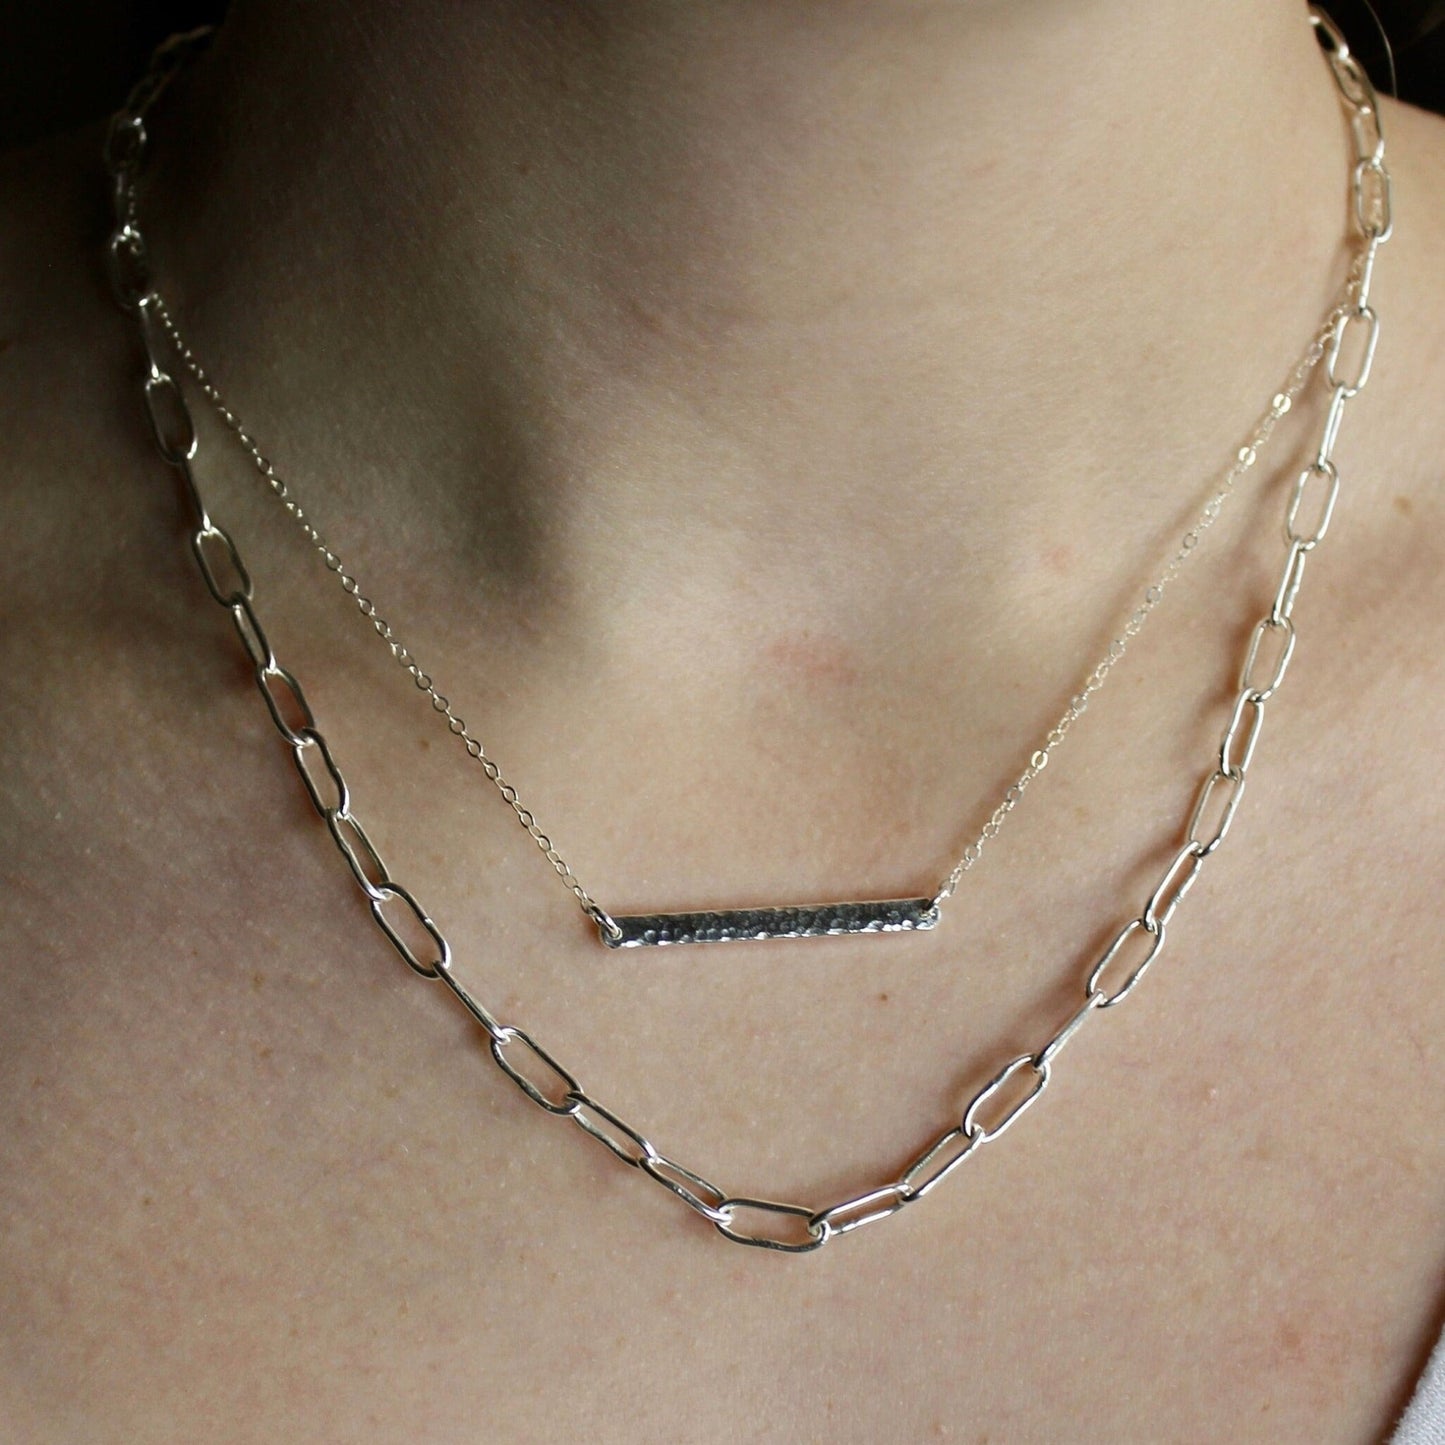 Medium Sterling Silver Oval Link Chain Necklace - AccentYourself